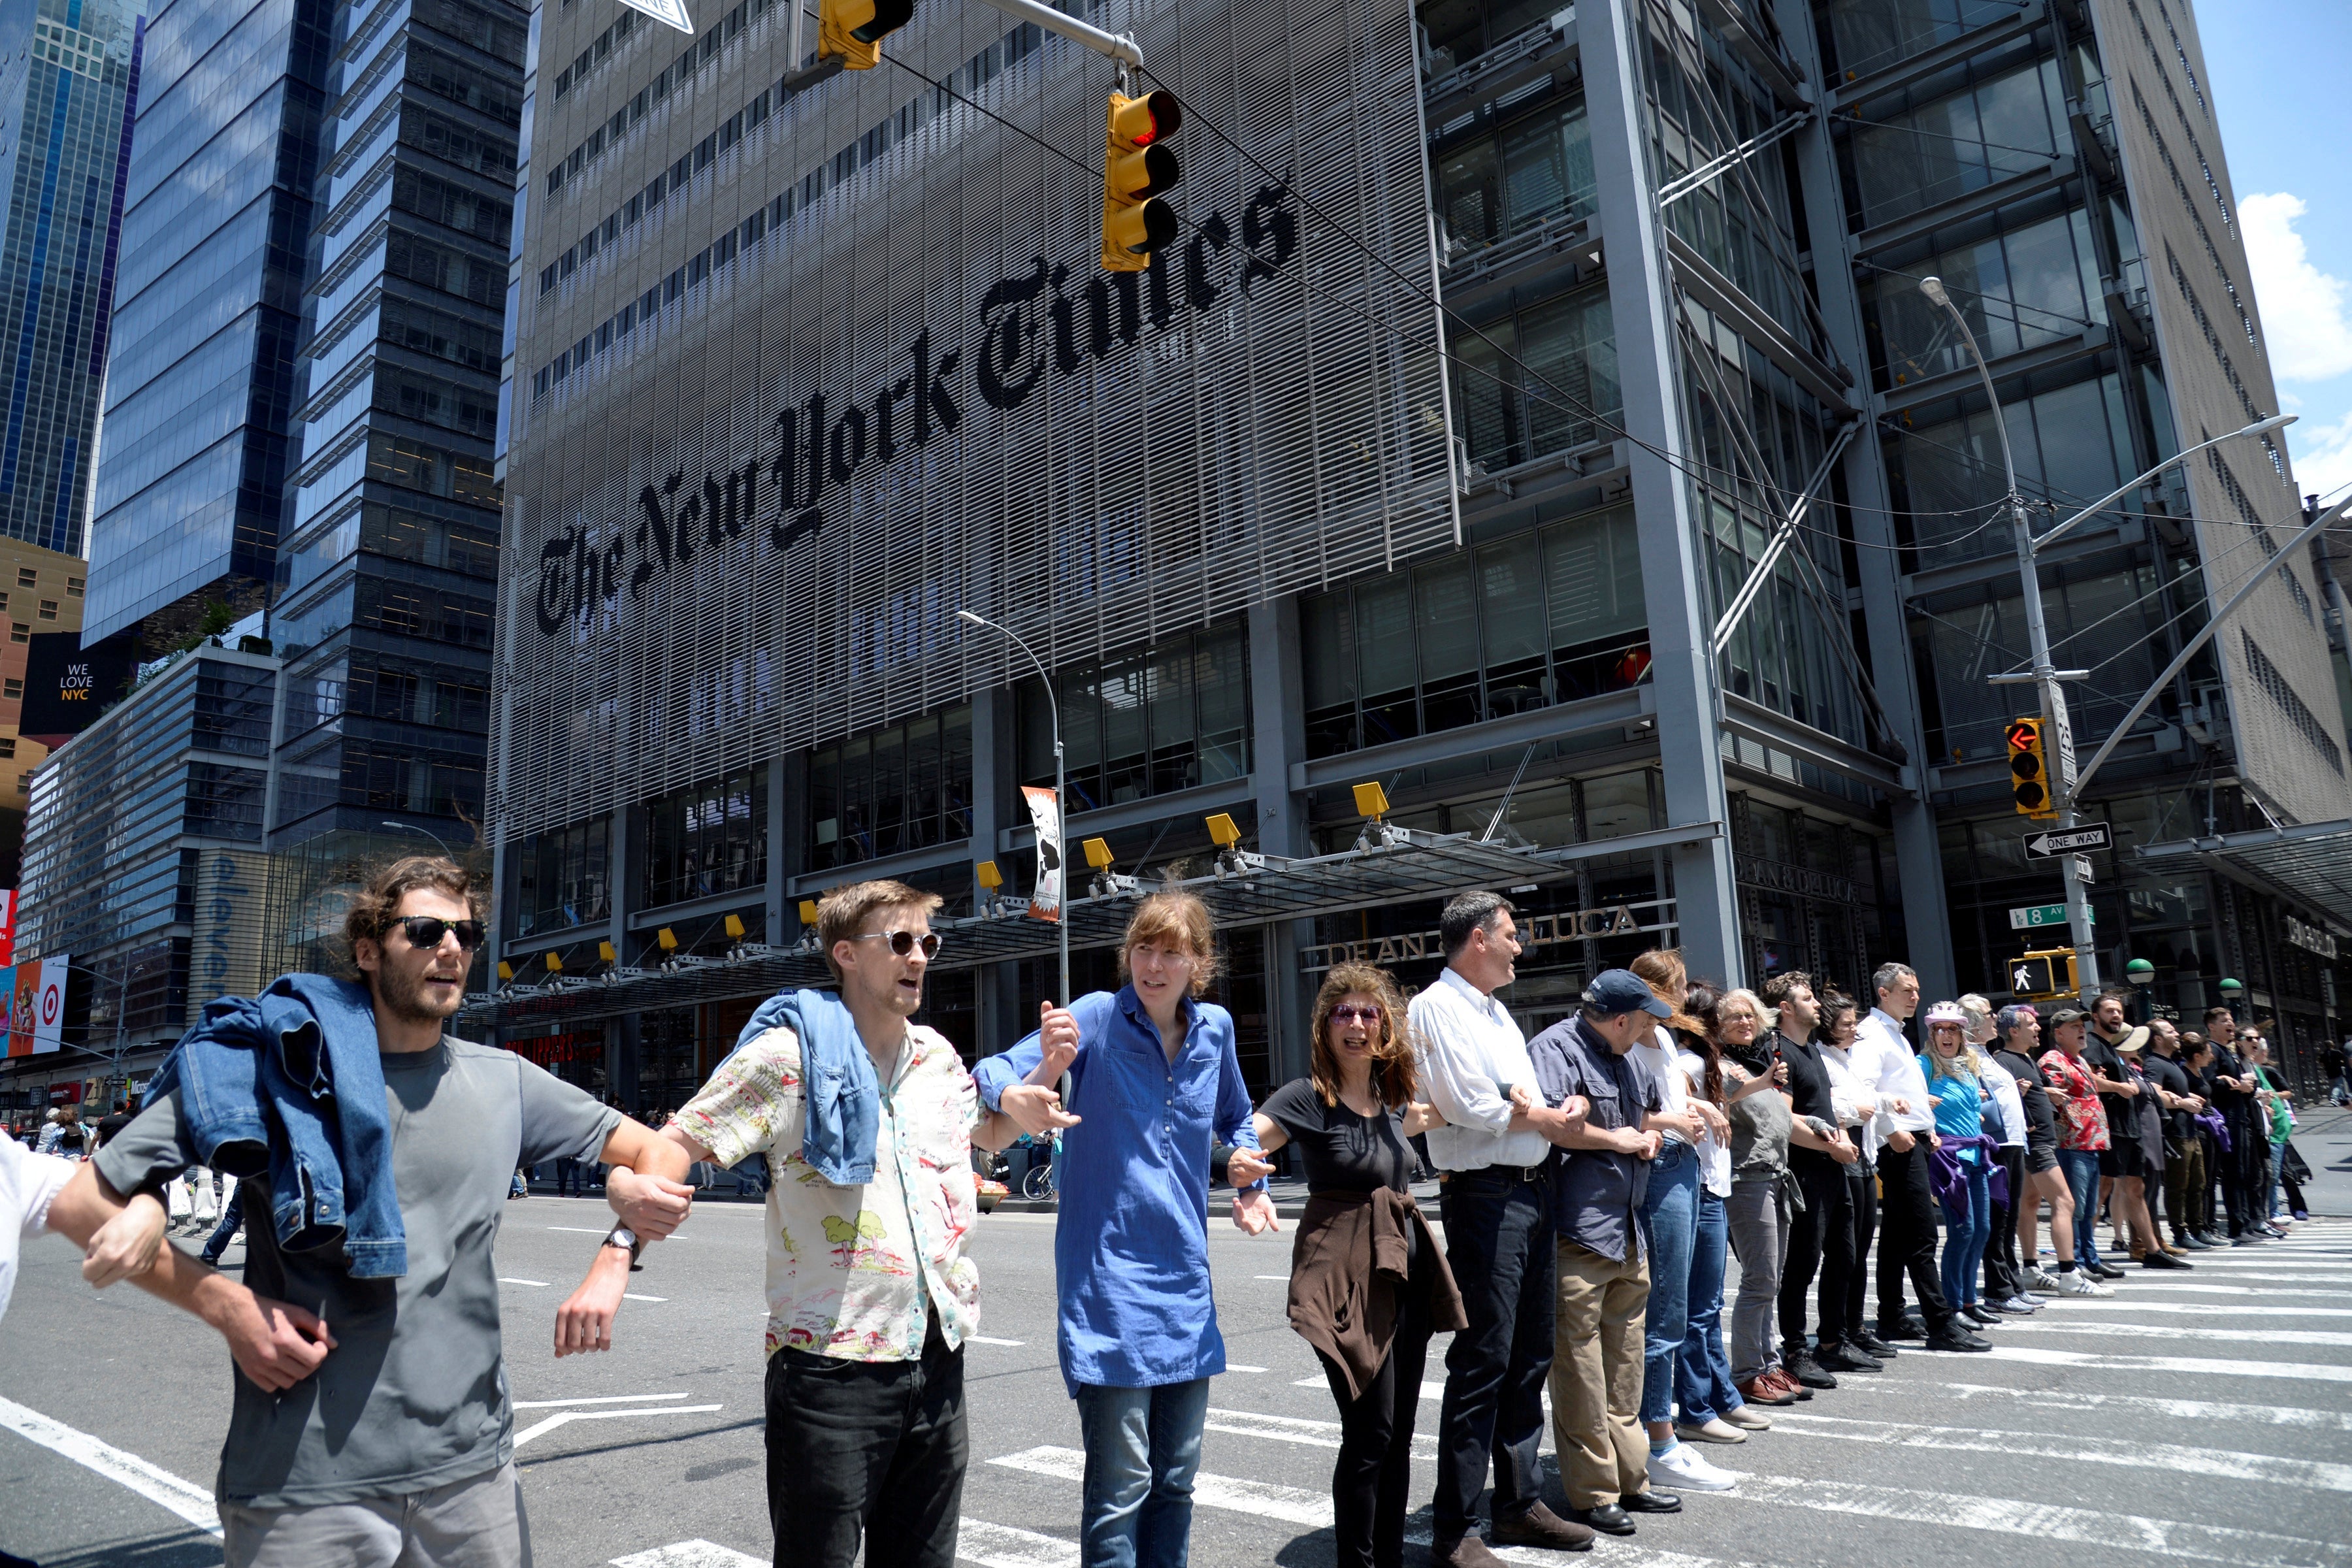 Activists from the group Extinction Rebellion block traffic on 8th Avenue in front of the New York Times building and the Port Authority Bus Terminal near Times Square in New York City on June 22, 2019. 